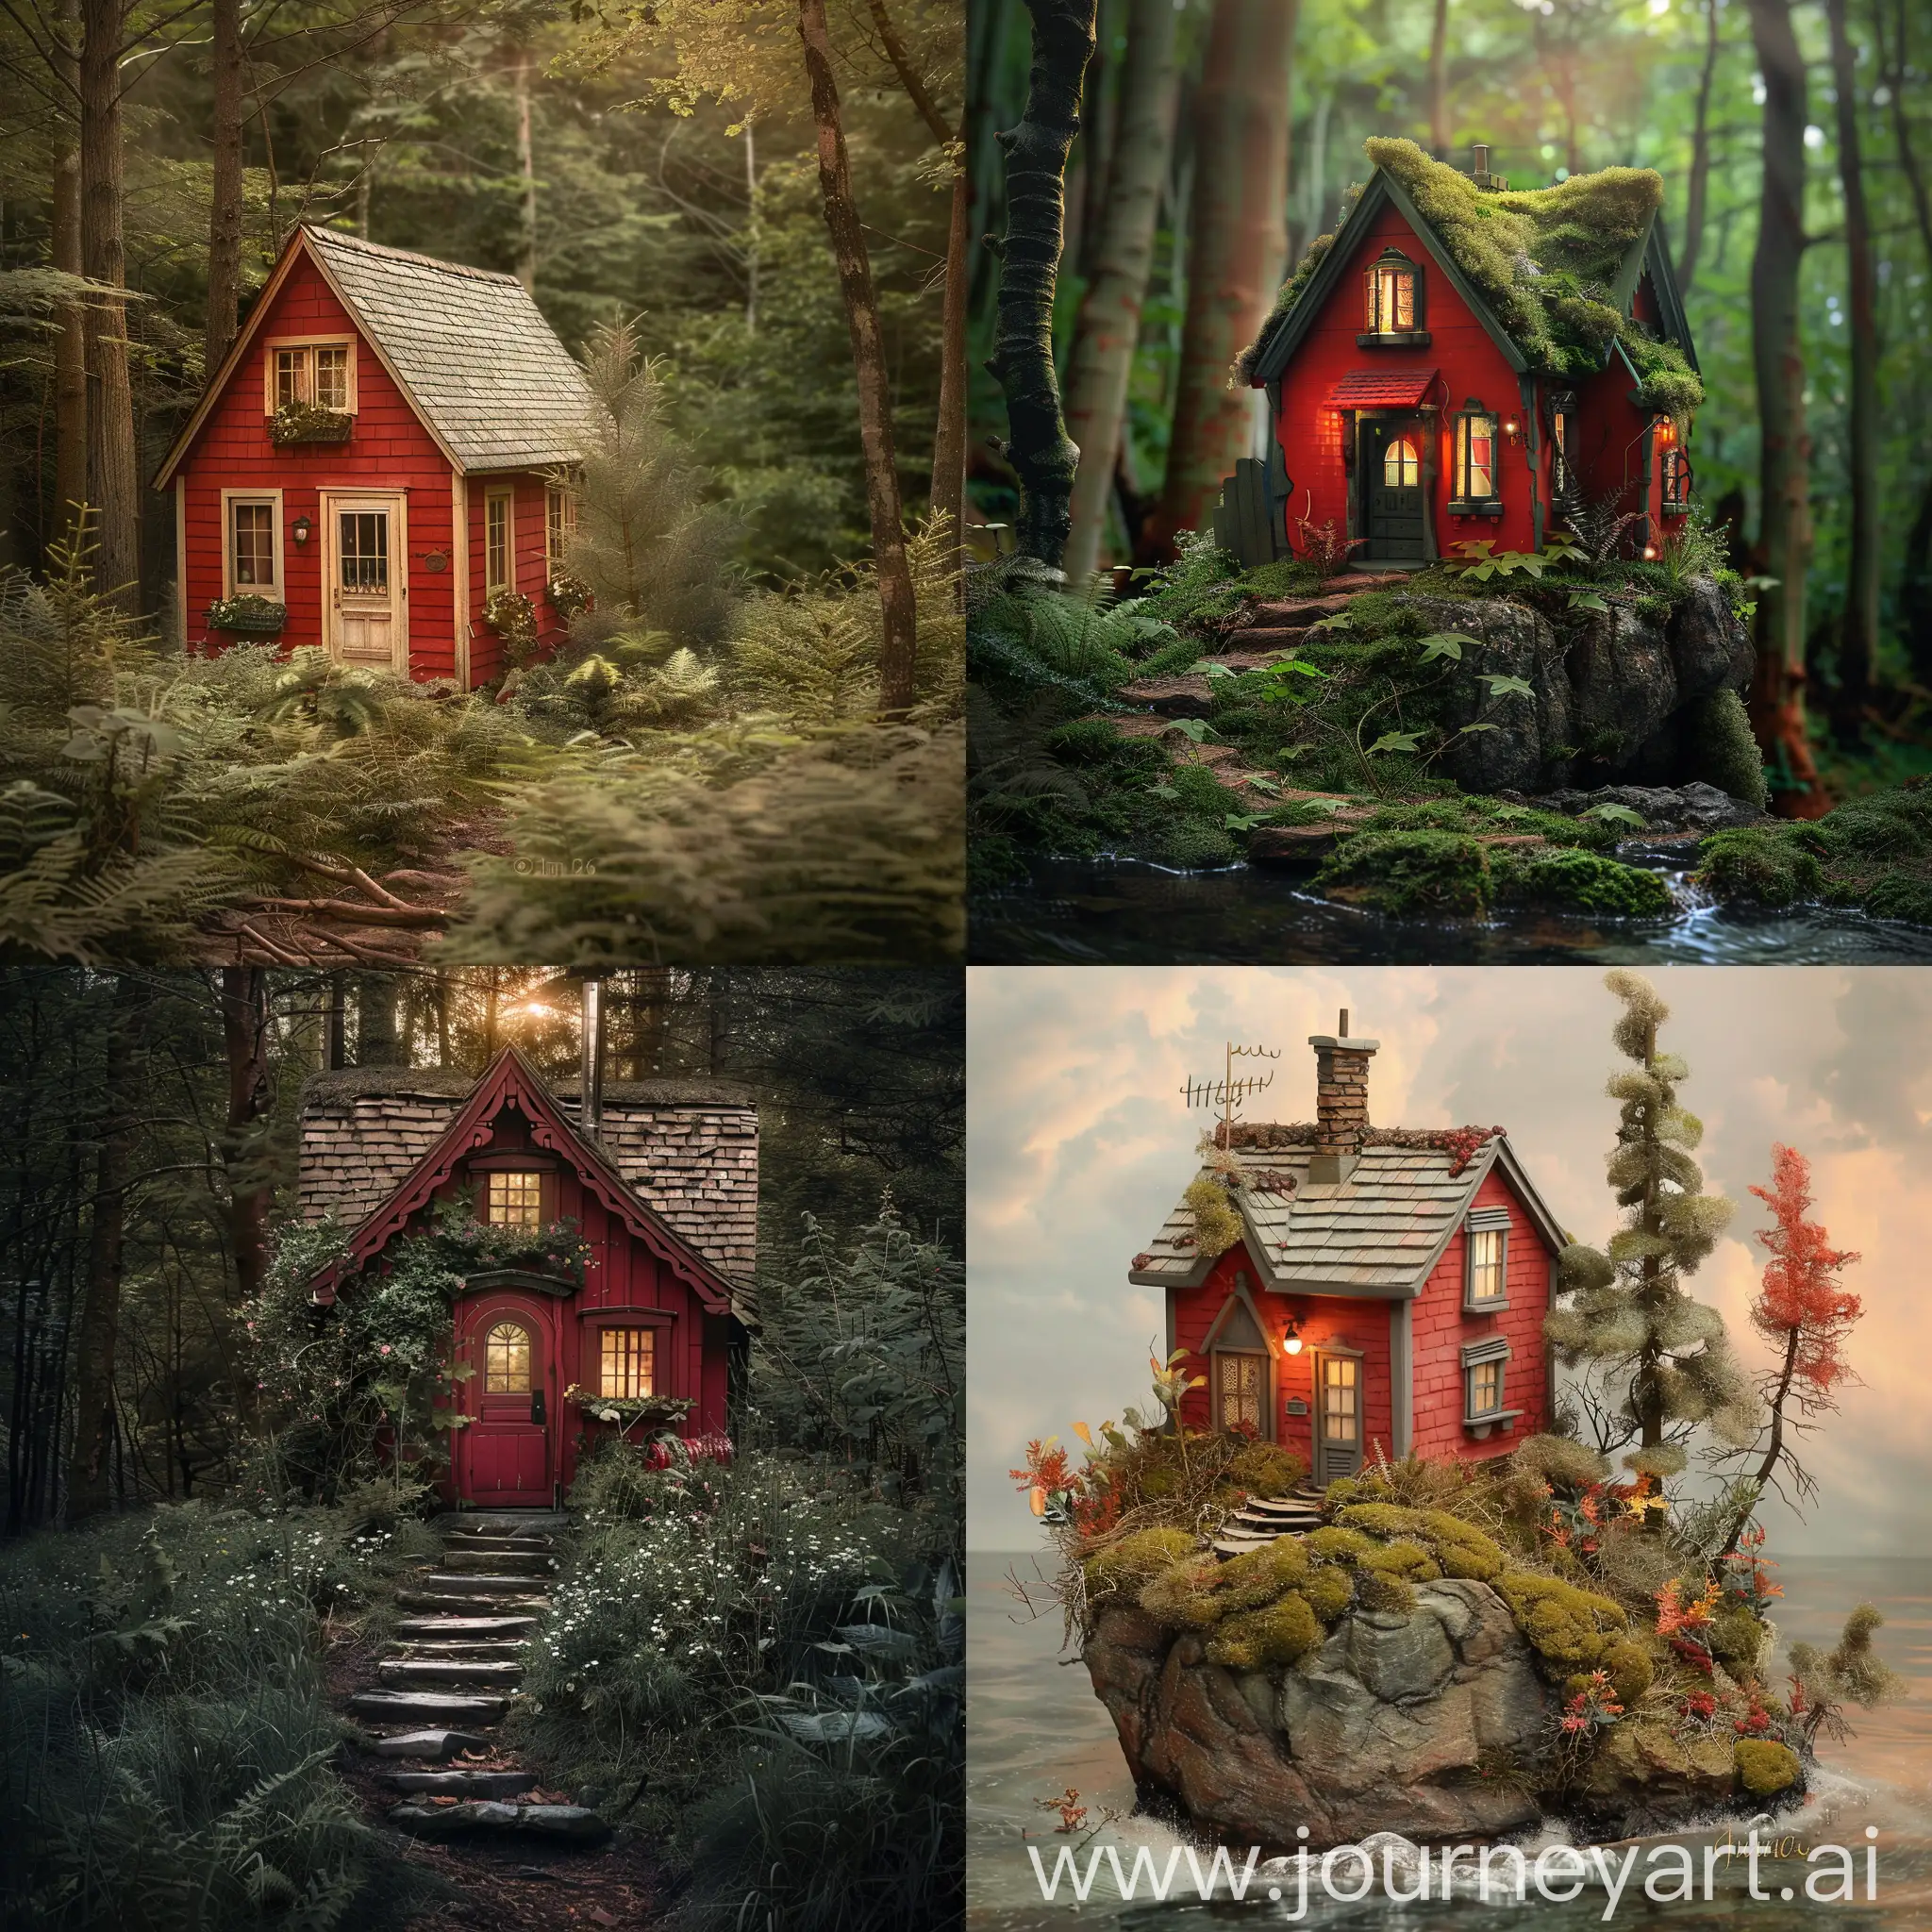 on the threshold between the two worlds, there is a tiny cozy red house

